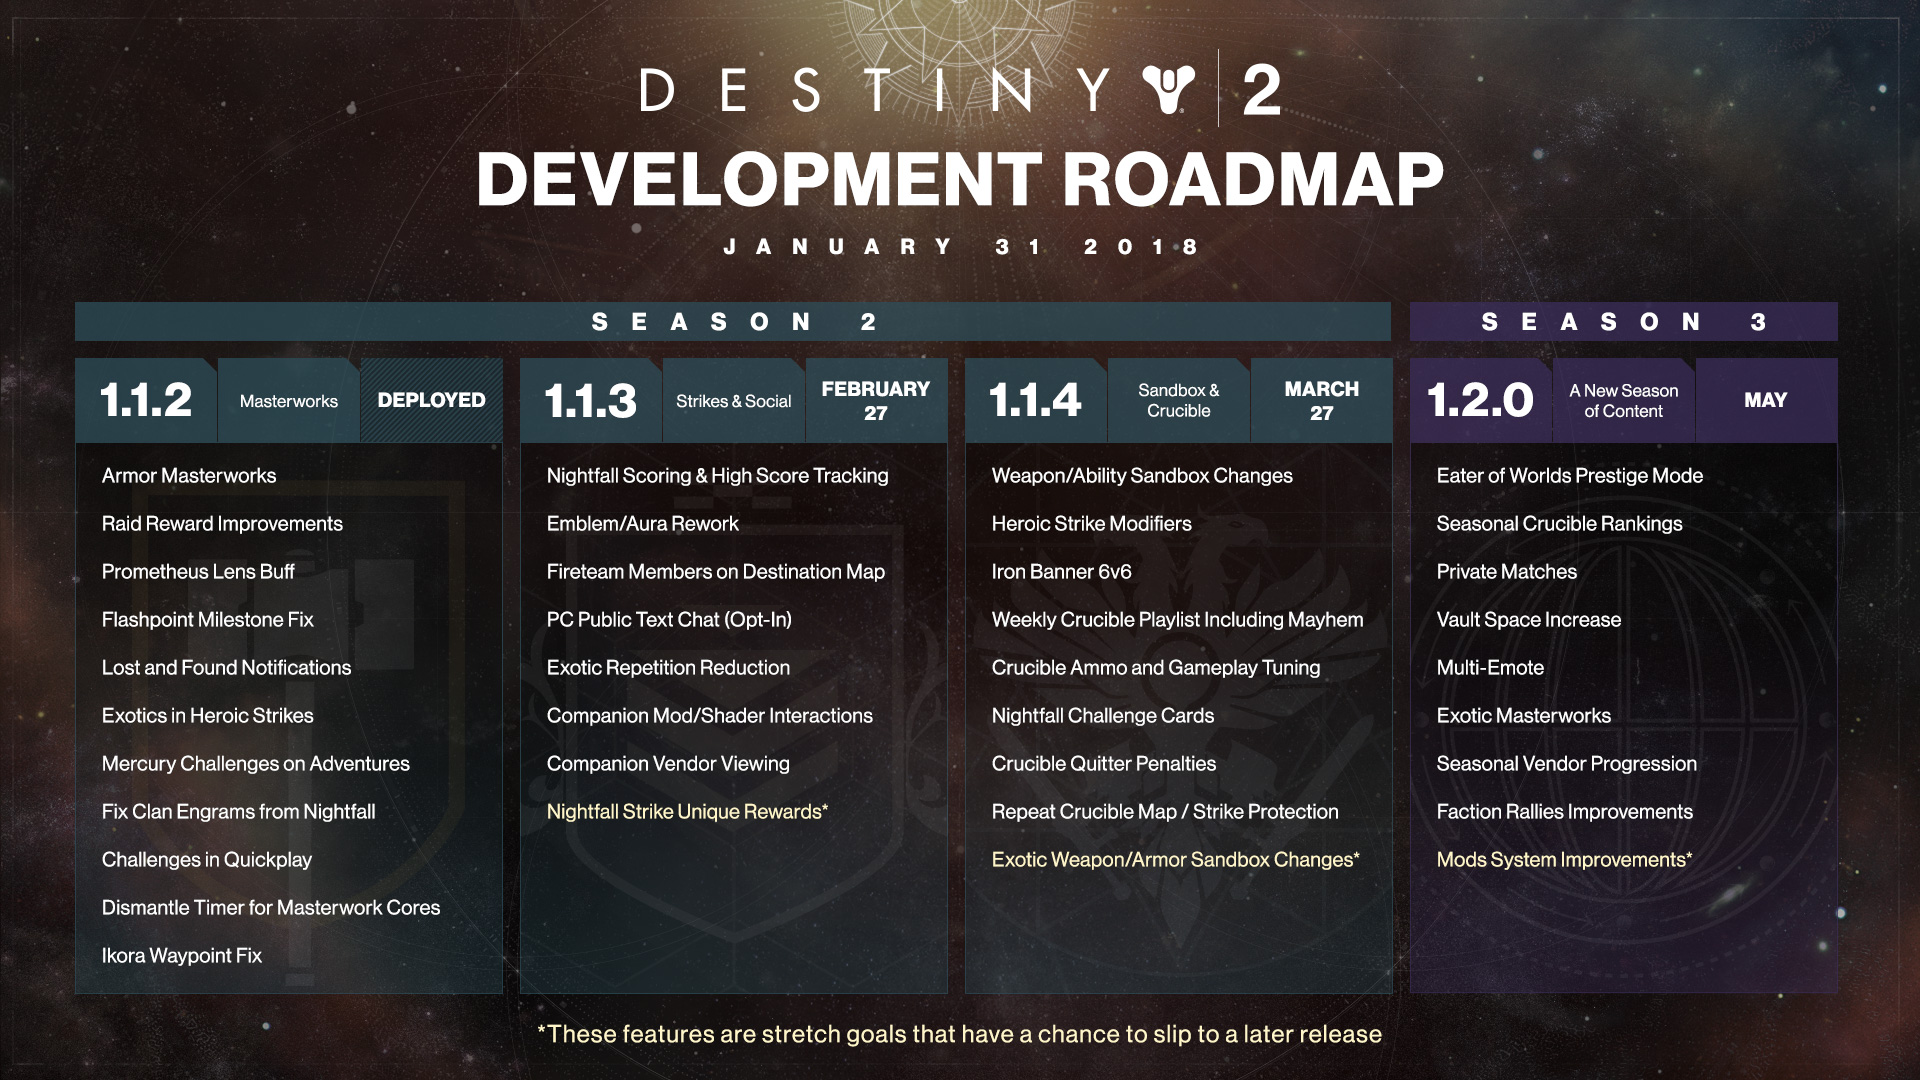 Bungie’s ‘Destiny 2’ roadmap is designed to win back players